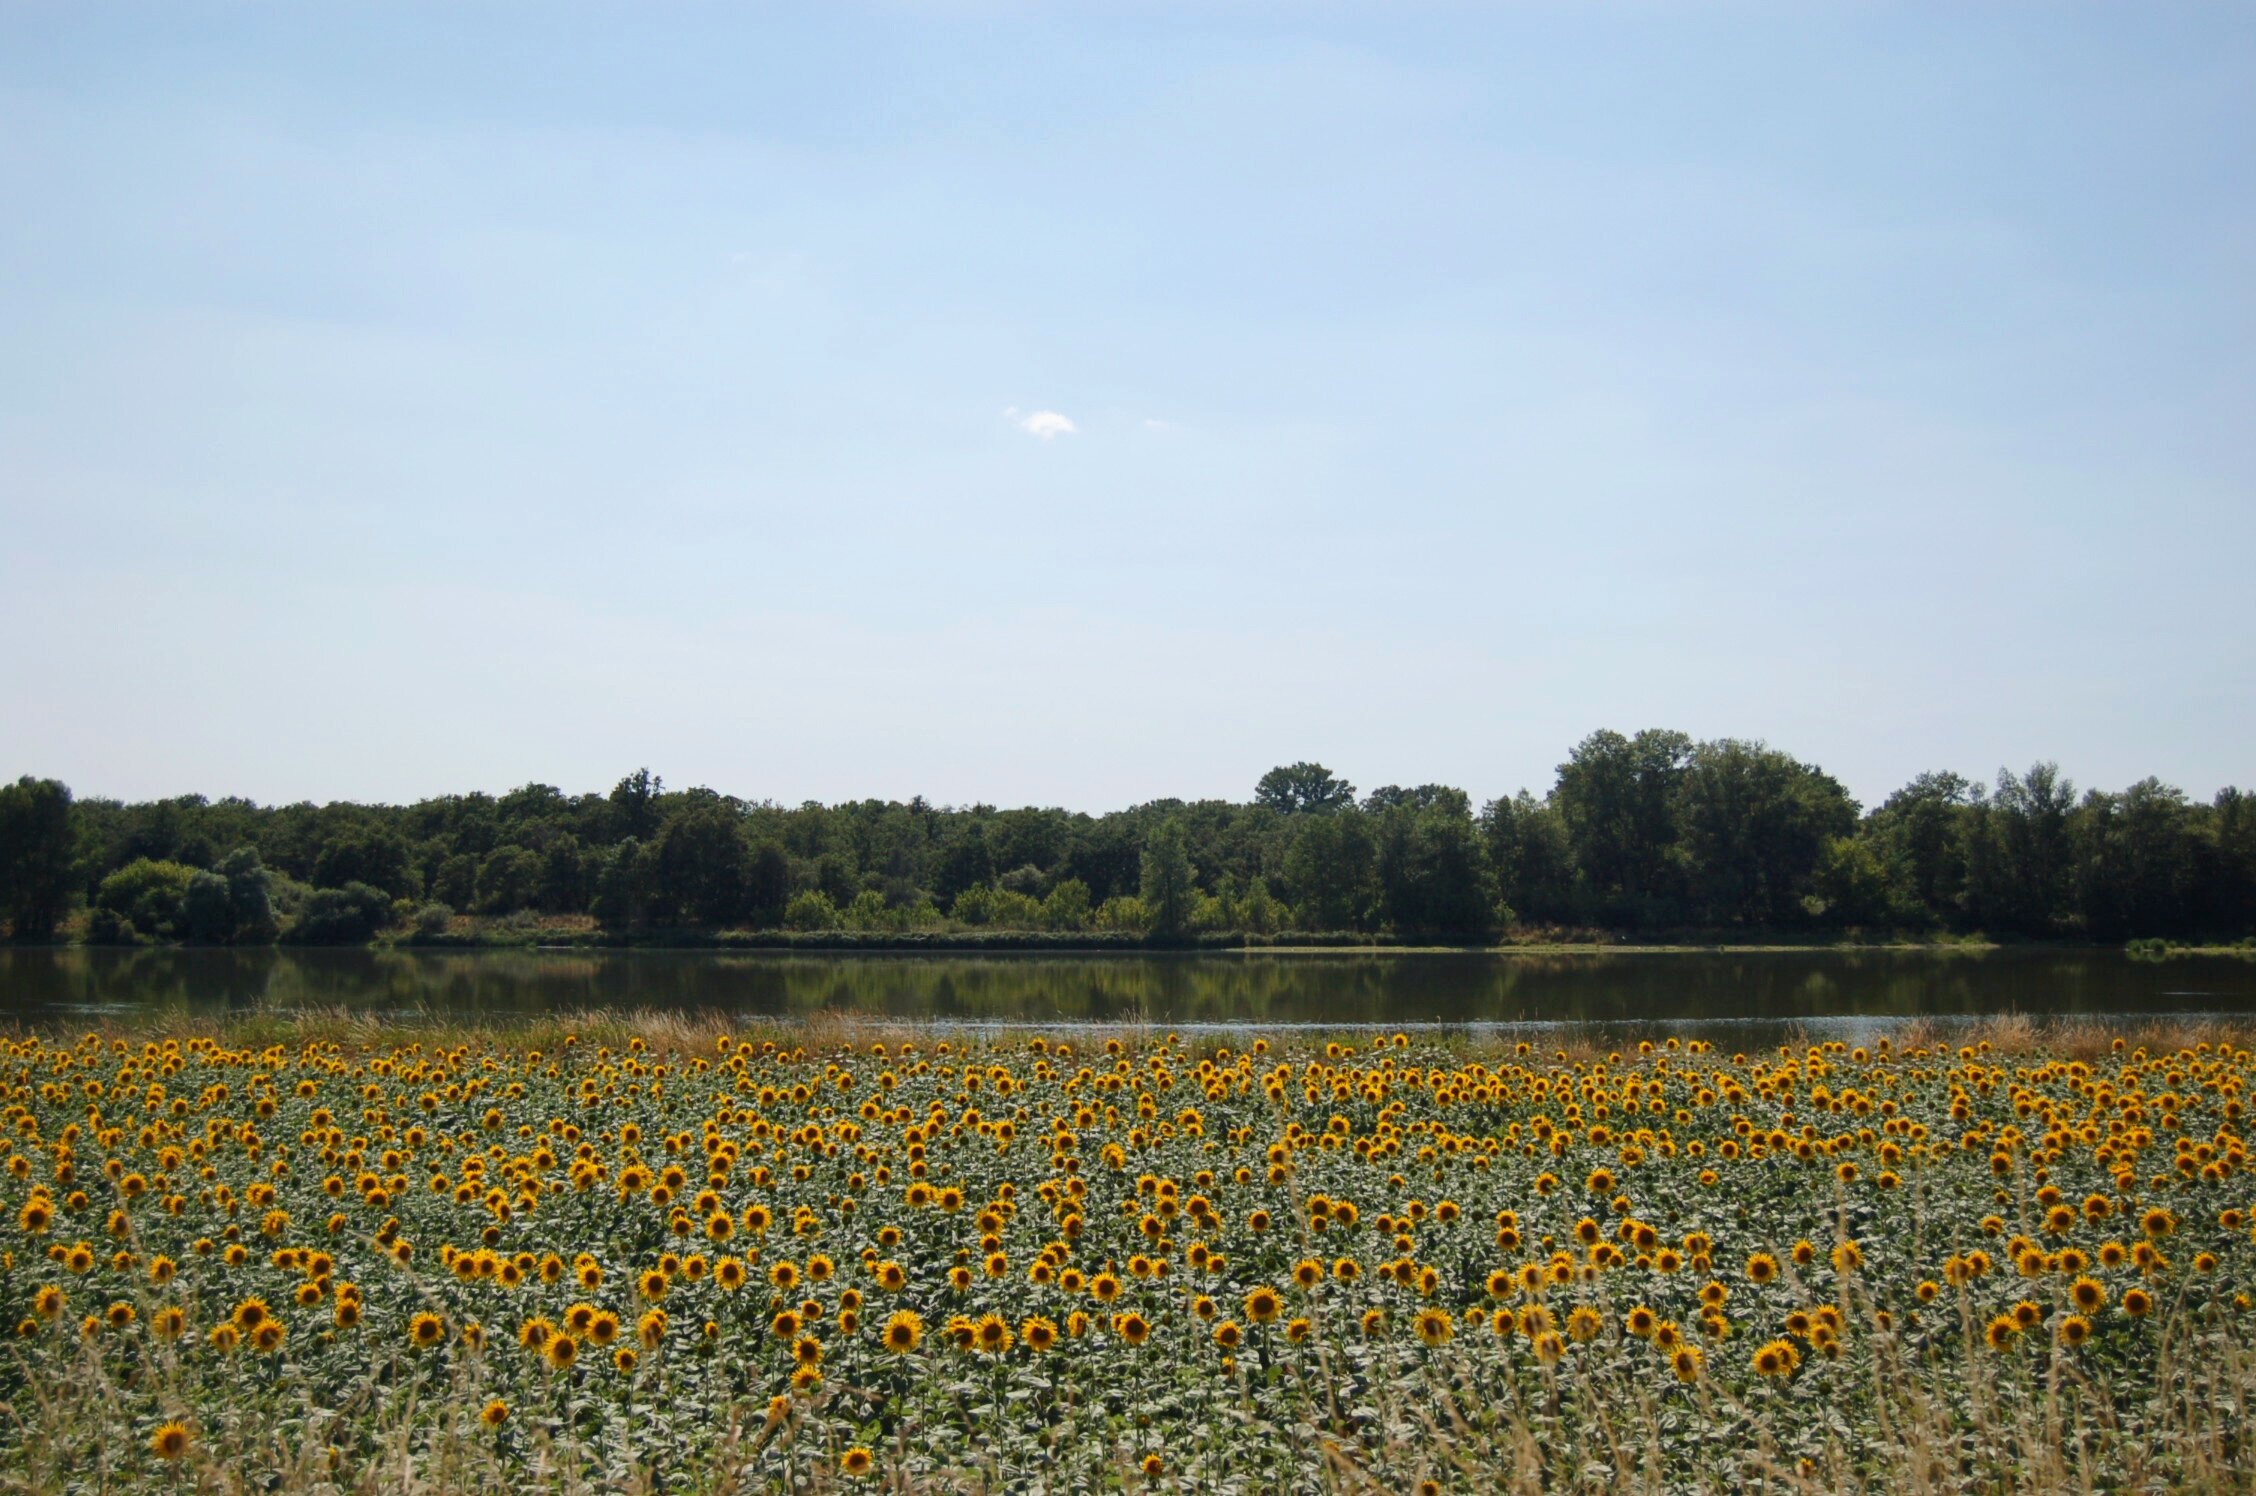 Loire River Valley Sunflowers